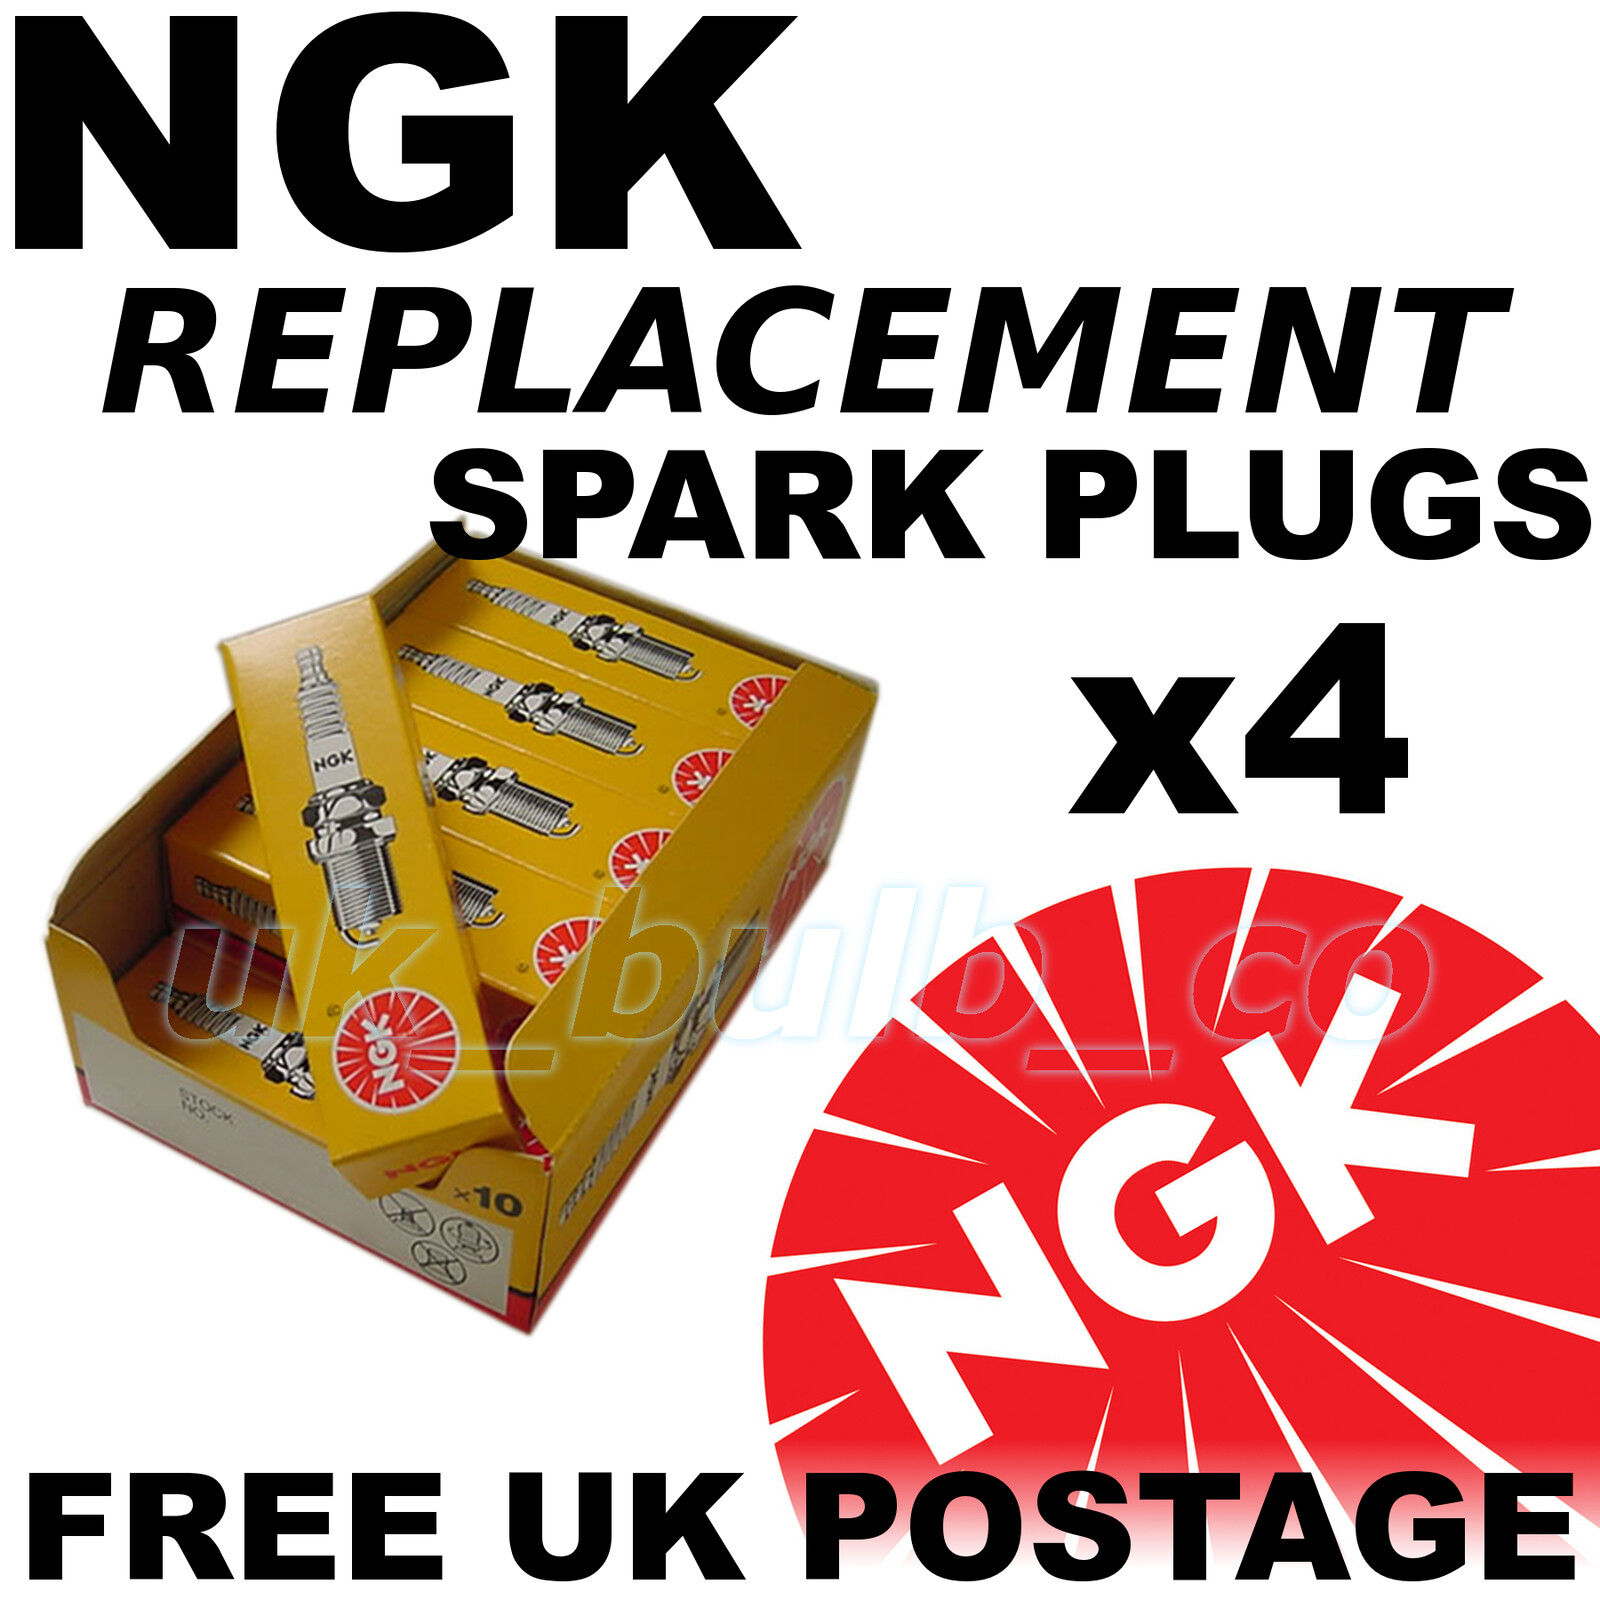 4x NGK Replacement SPARK PLUGS RENAULT GRAND ESPACE 2.0lt NON TURBO 02- #4619